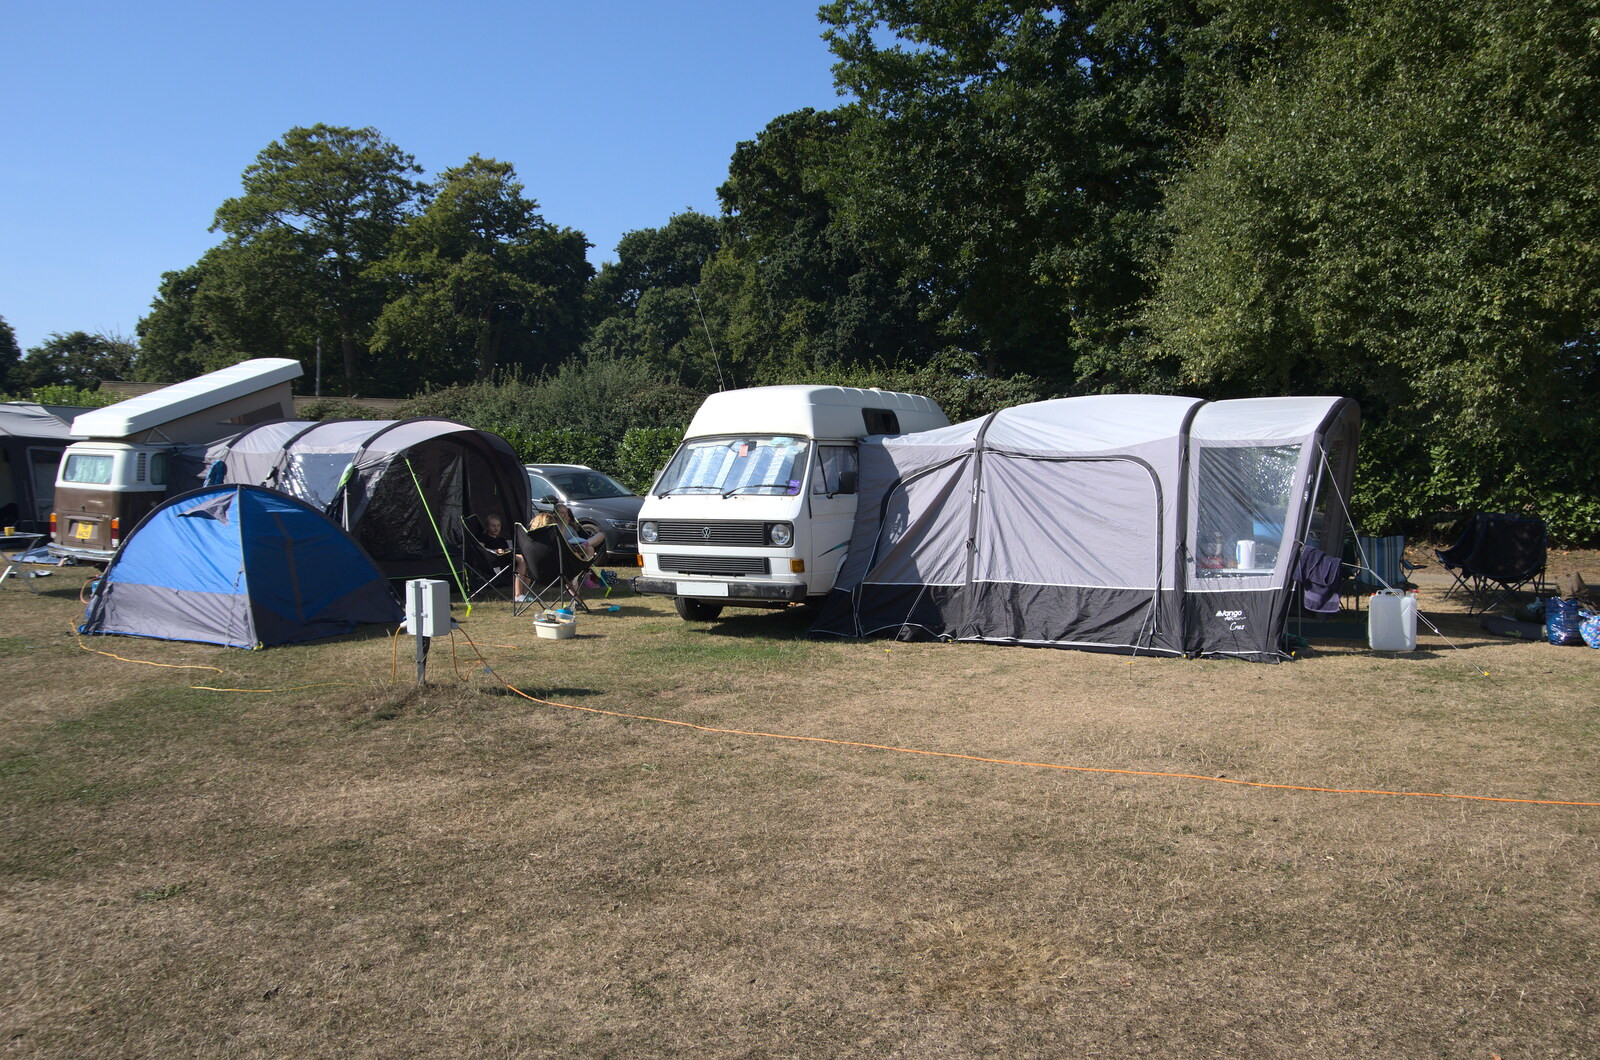 The campervan in its spot from Camping at Forest Park, Cromer, Norfolk - 12th August 2022